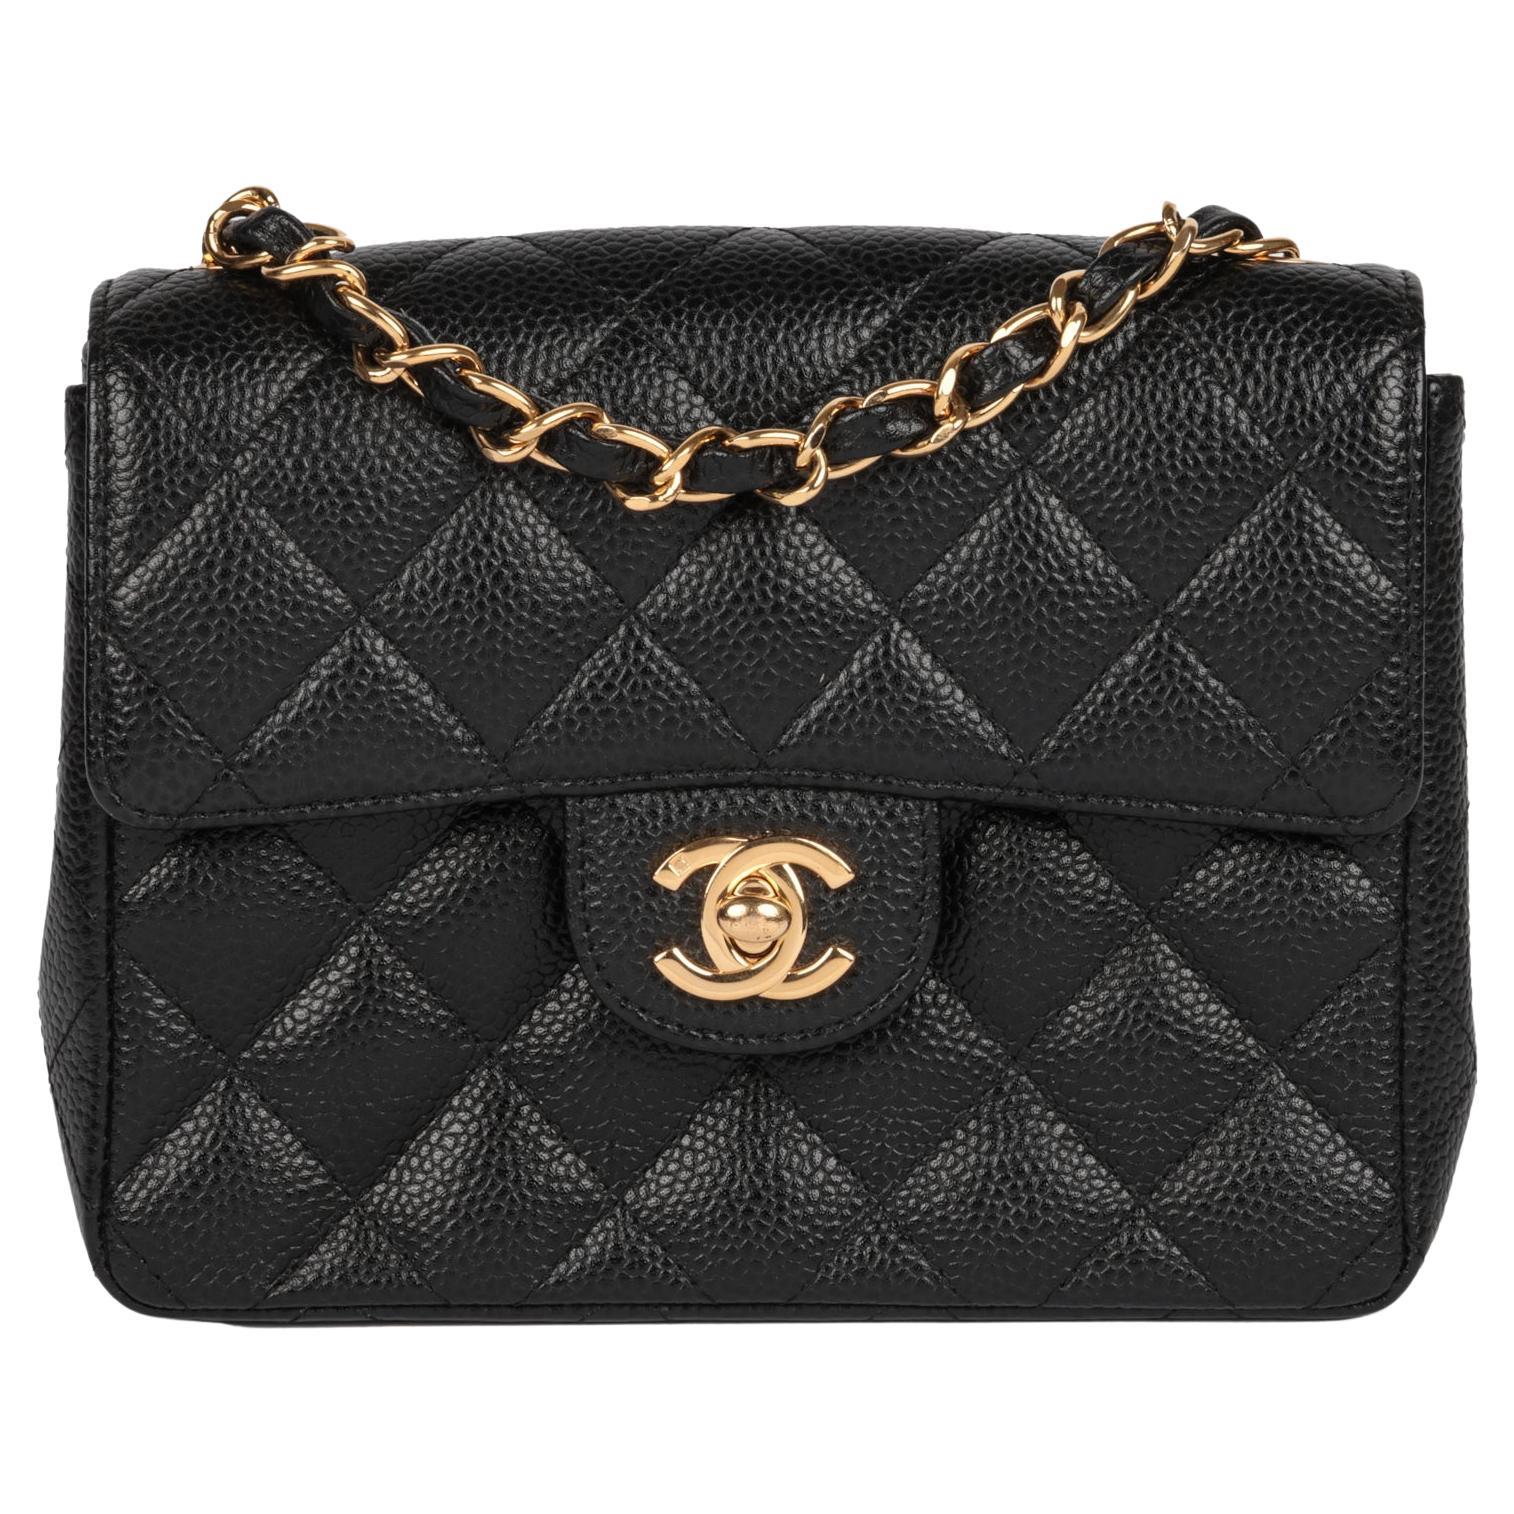 CHANEL Black Quilted Caviar Leather Vintage Square Mini Flap Bag